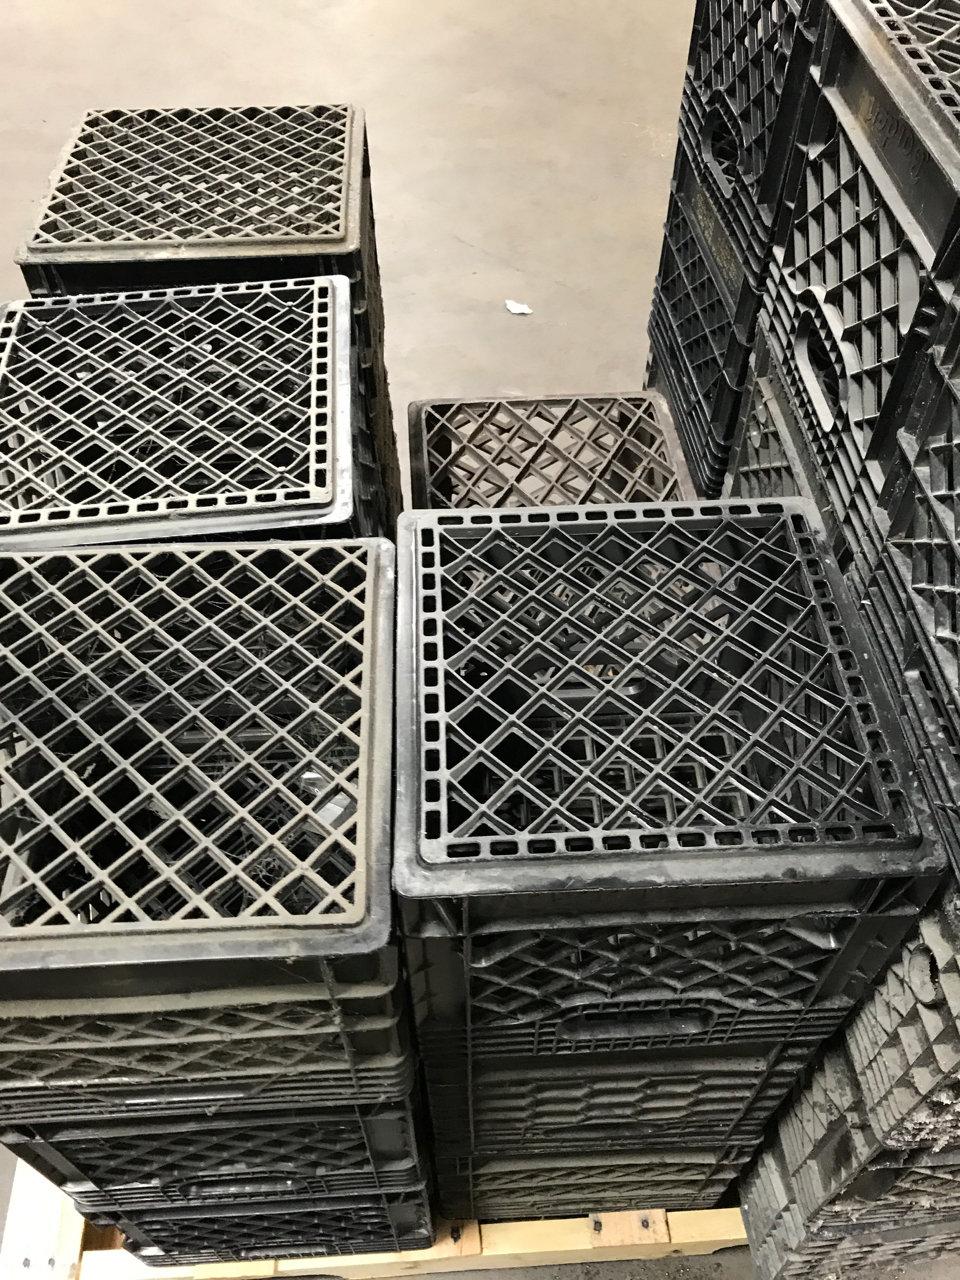 Pallet of milk crates selling times the money